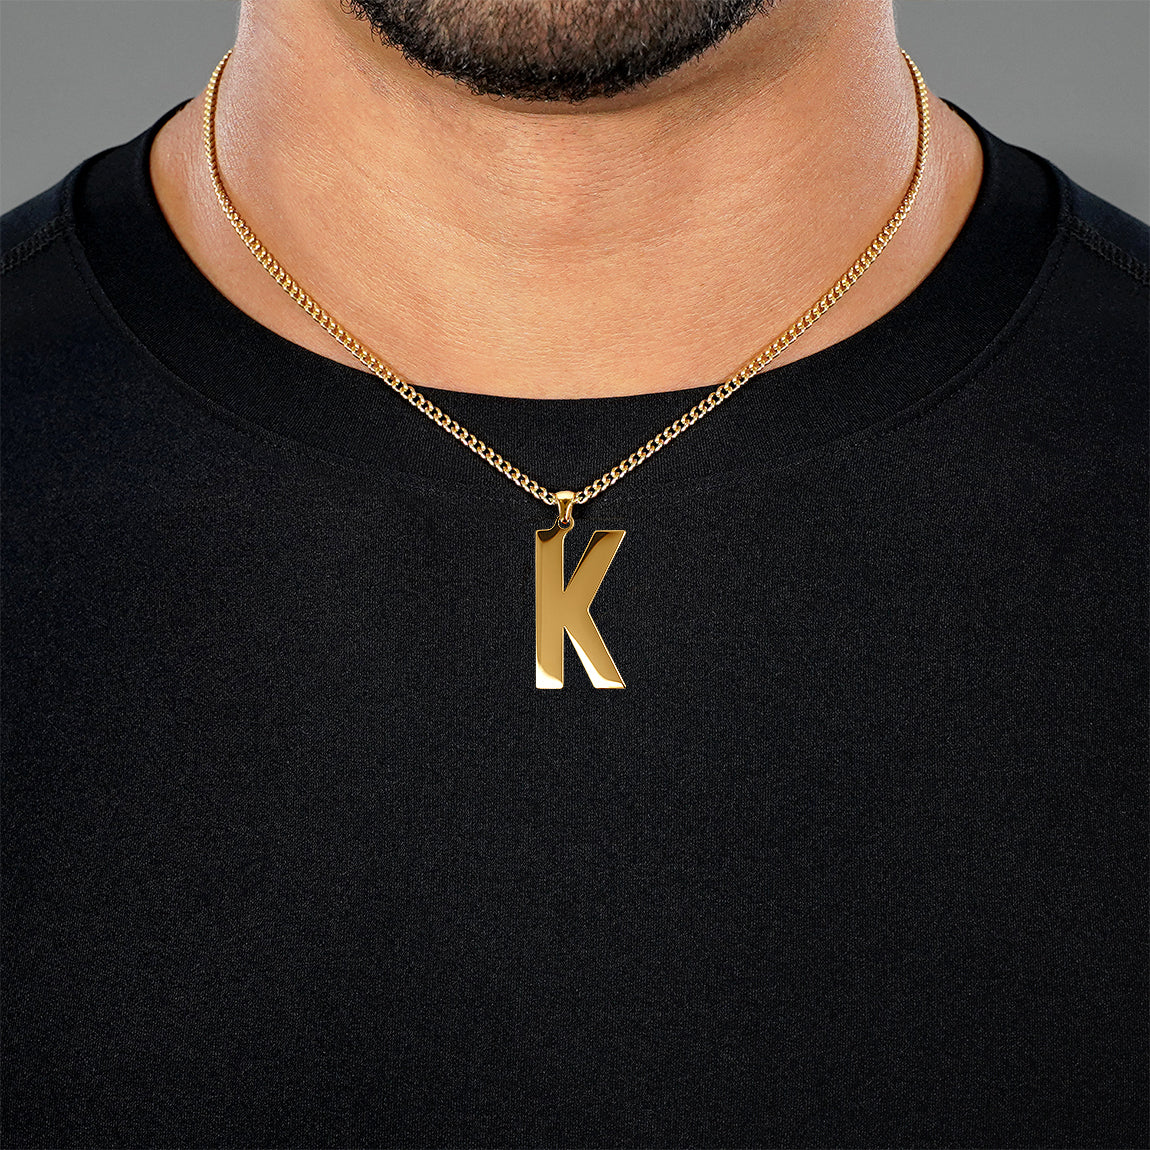 K Letter Pendant with Chain Necklace - Gold Plated Stainless Steel